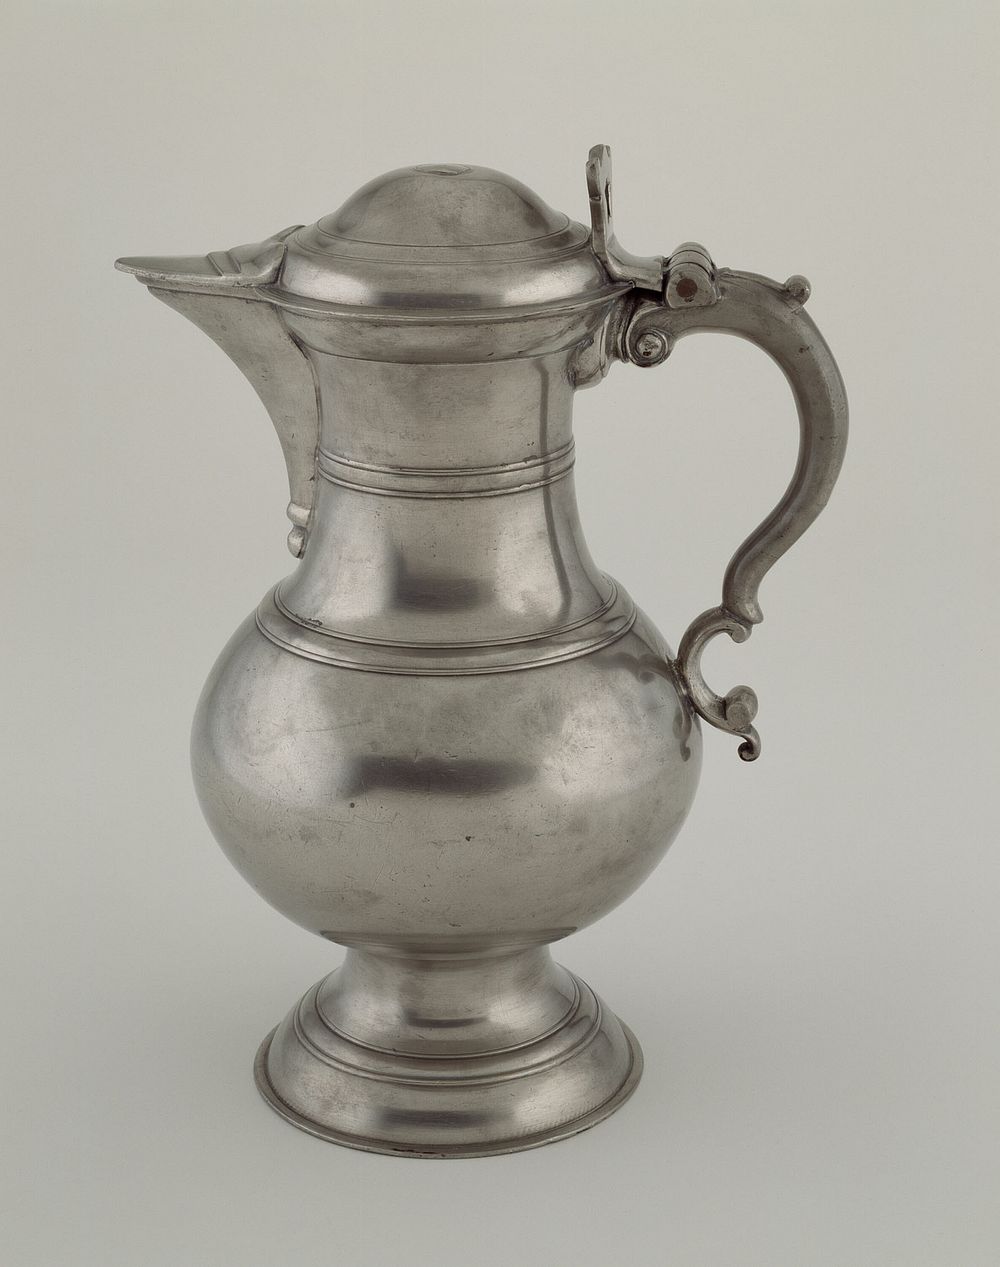 Flagon by William Will